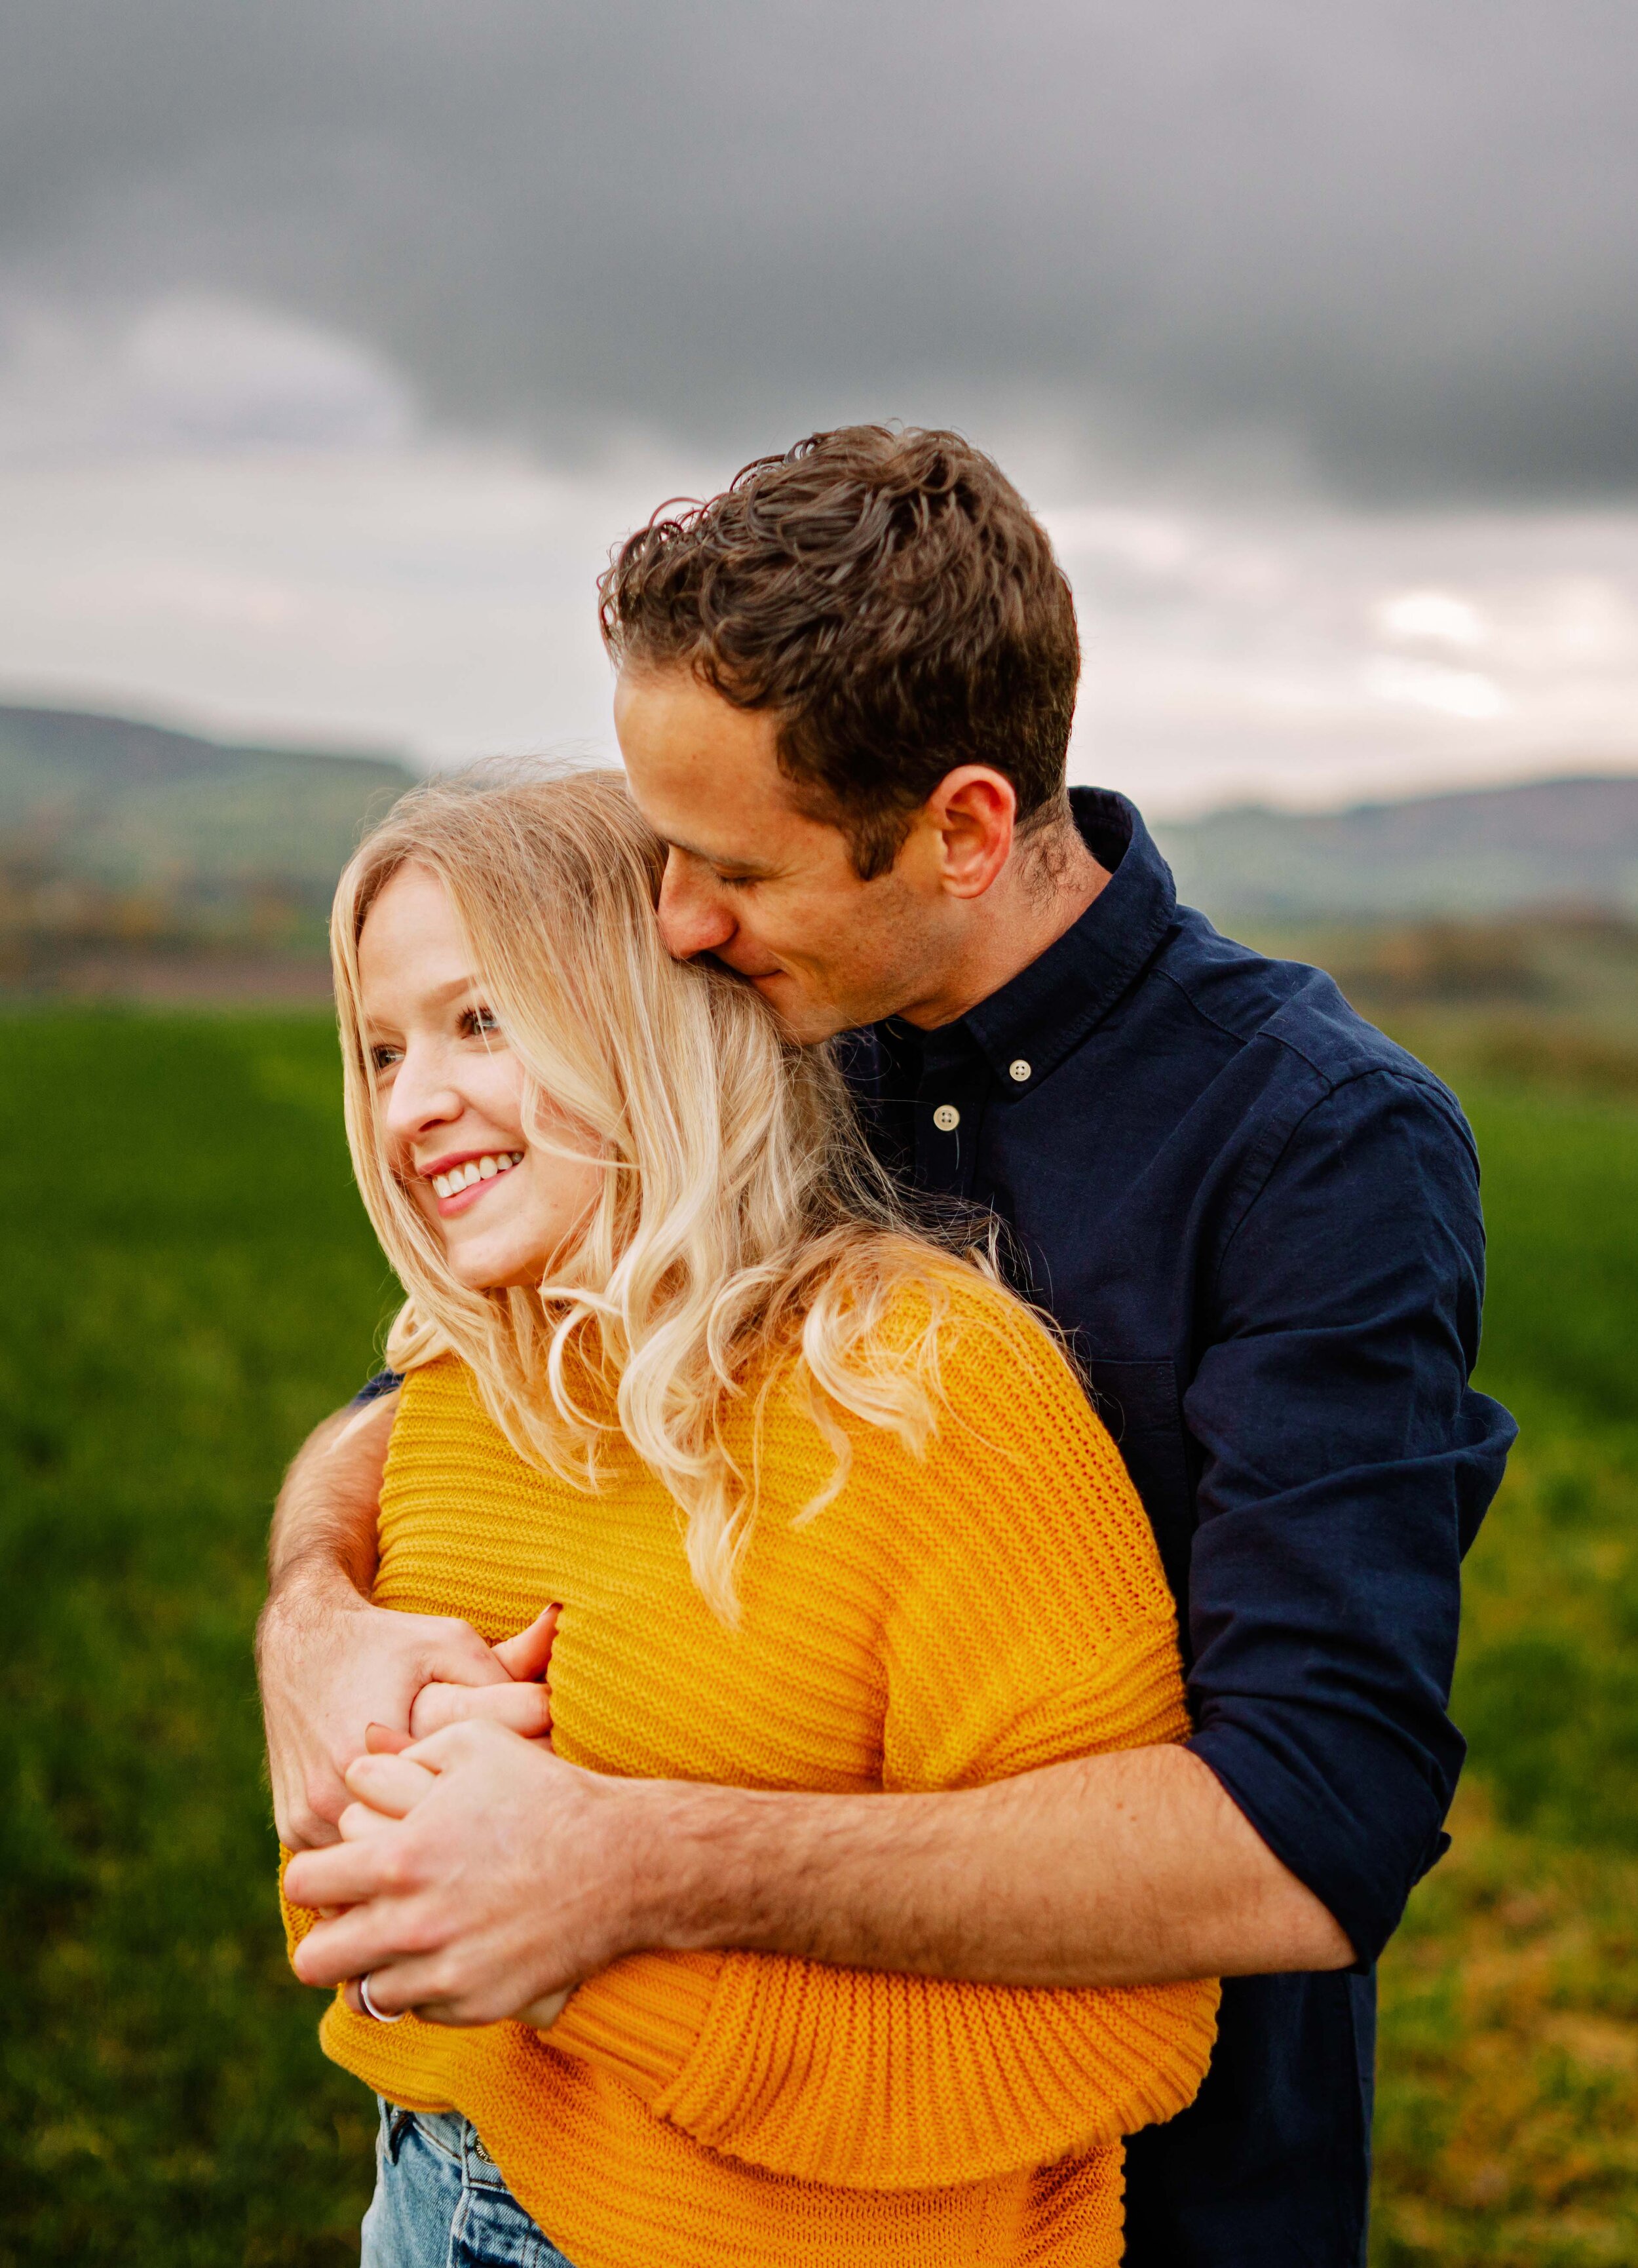  engagement session with young couple and pomeranian dogs in green fields in Ramstein Germany by family photographer sarah Havens    Paarshooting mit jungem Pärchen und Hunden in der Feldern bei Kaiserslautern, Rheinland-Pfalz im Herbst 